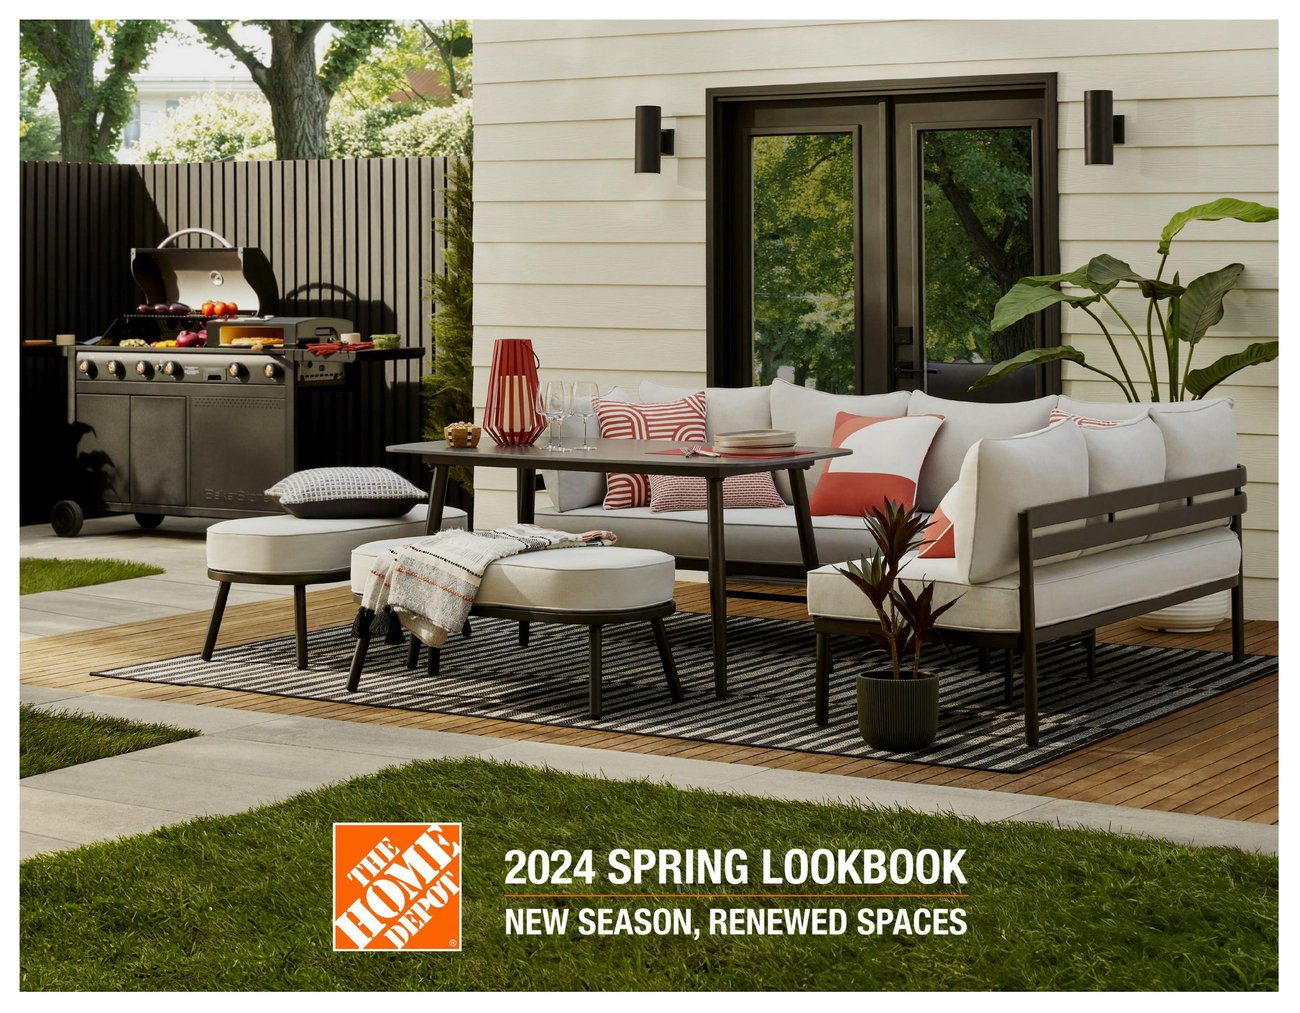 Home Depot - Spring LookBook 2024 - Page 1